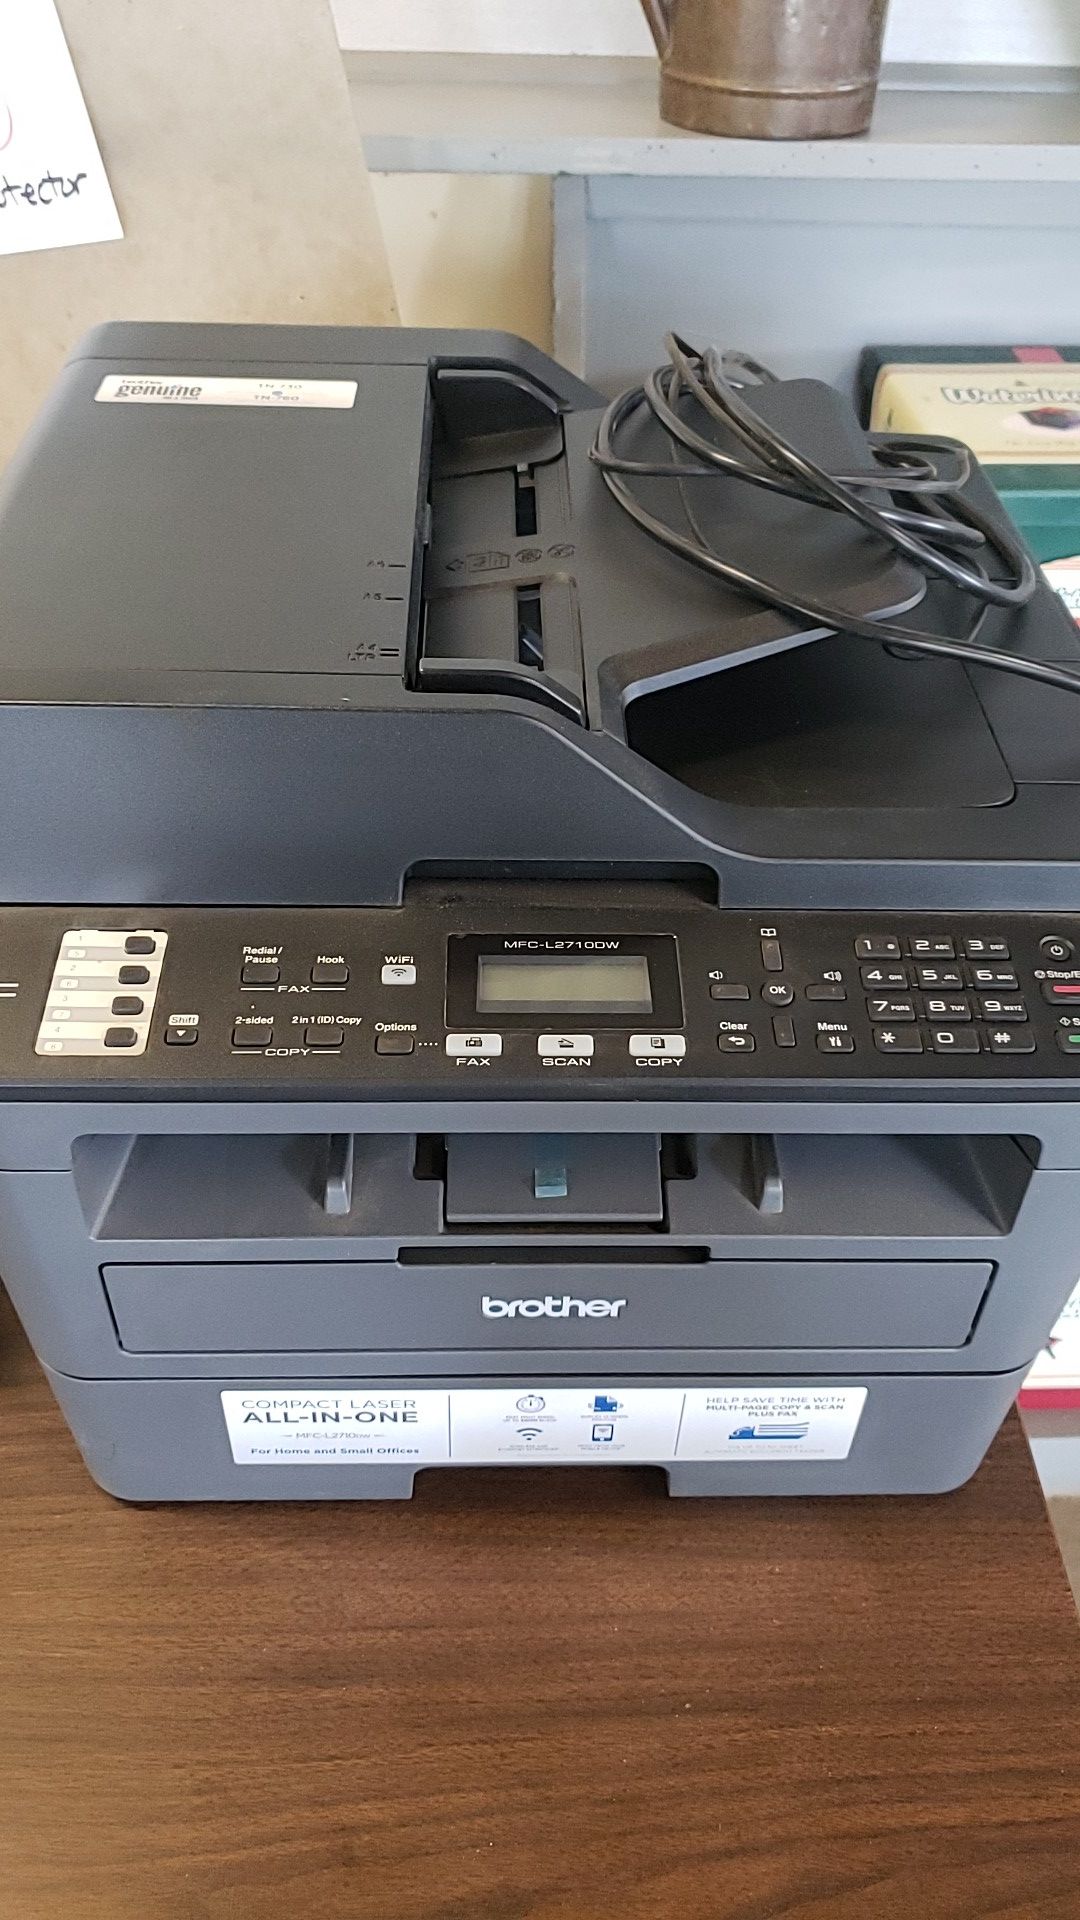 Brother fax, print, scan MFC-L2710dw